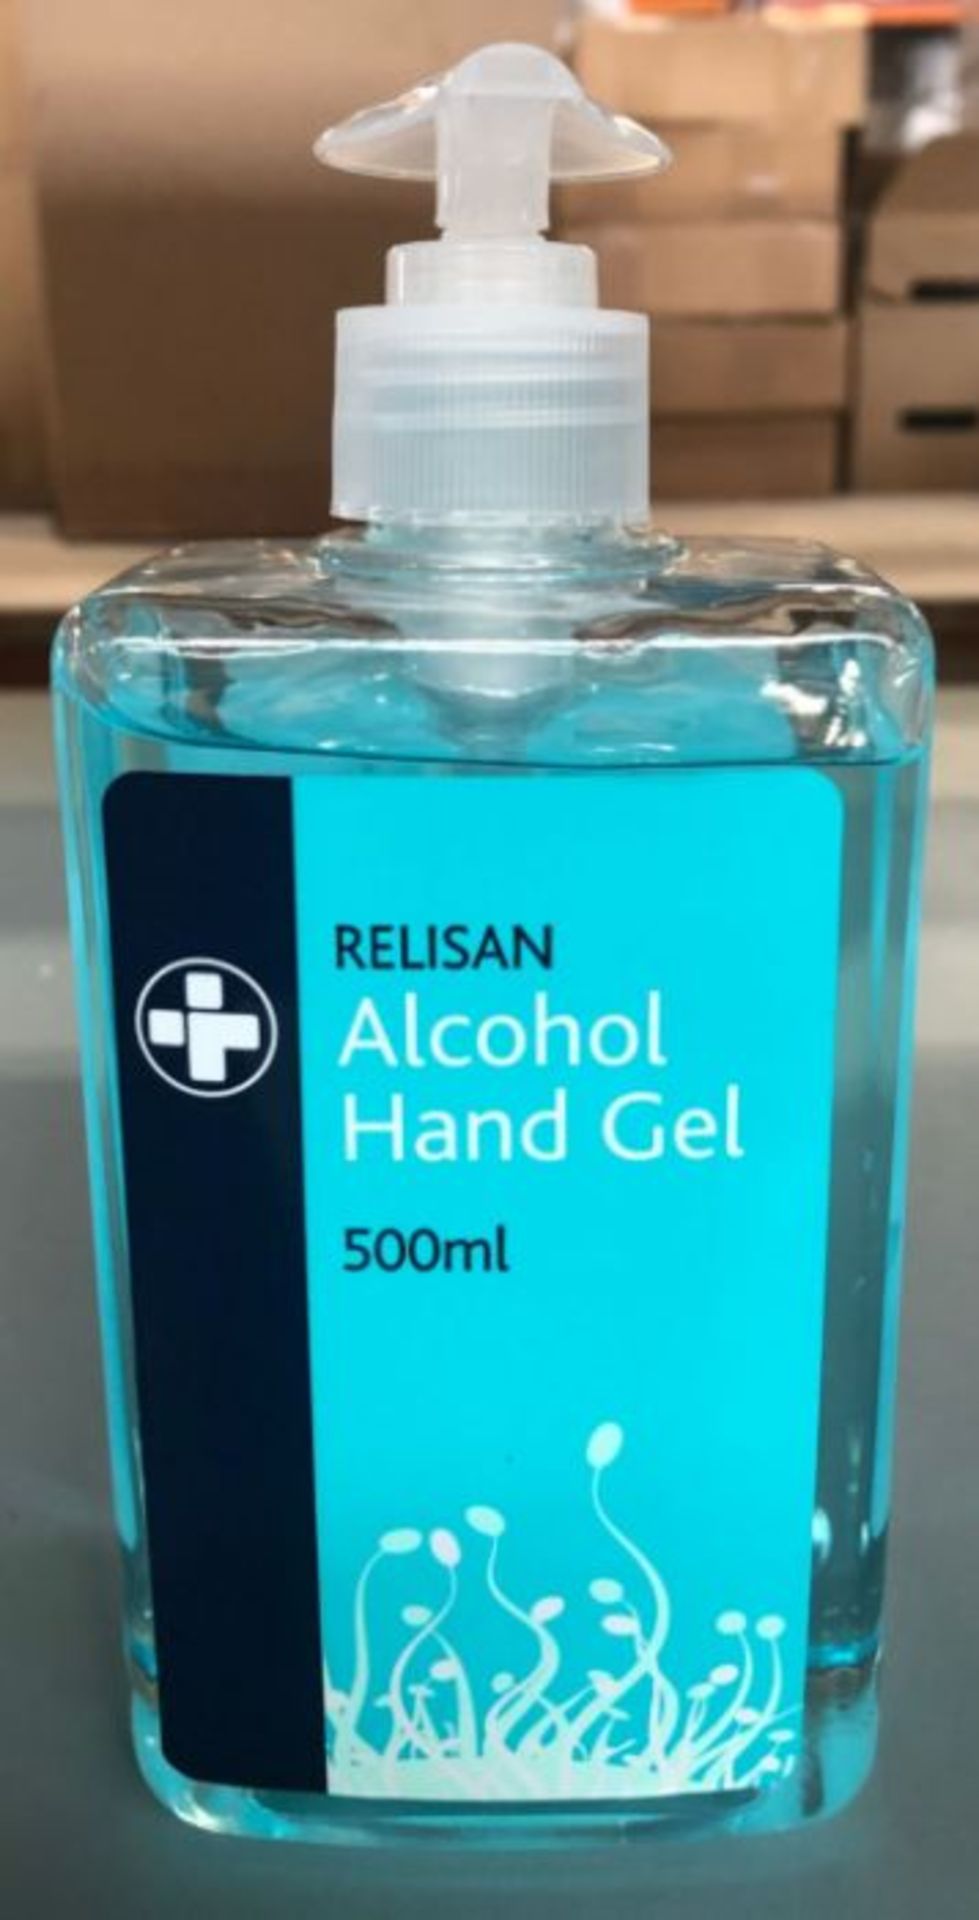 1 X BULK PALLET TO CONTAIN 44 X BOXES OF RELISAN ALCOHOL HAND GEL / 20 X 500ml BOTTLES PER BOX / - Image 2 of 2